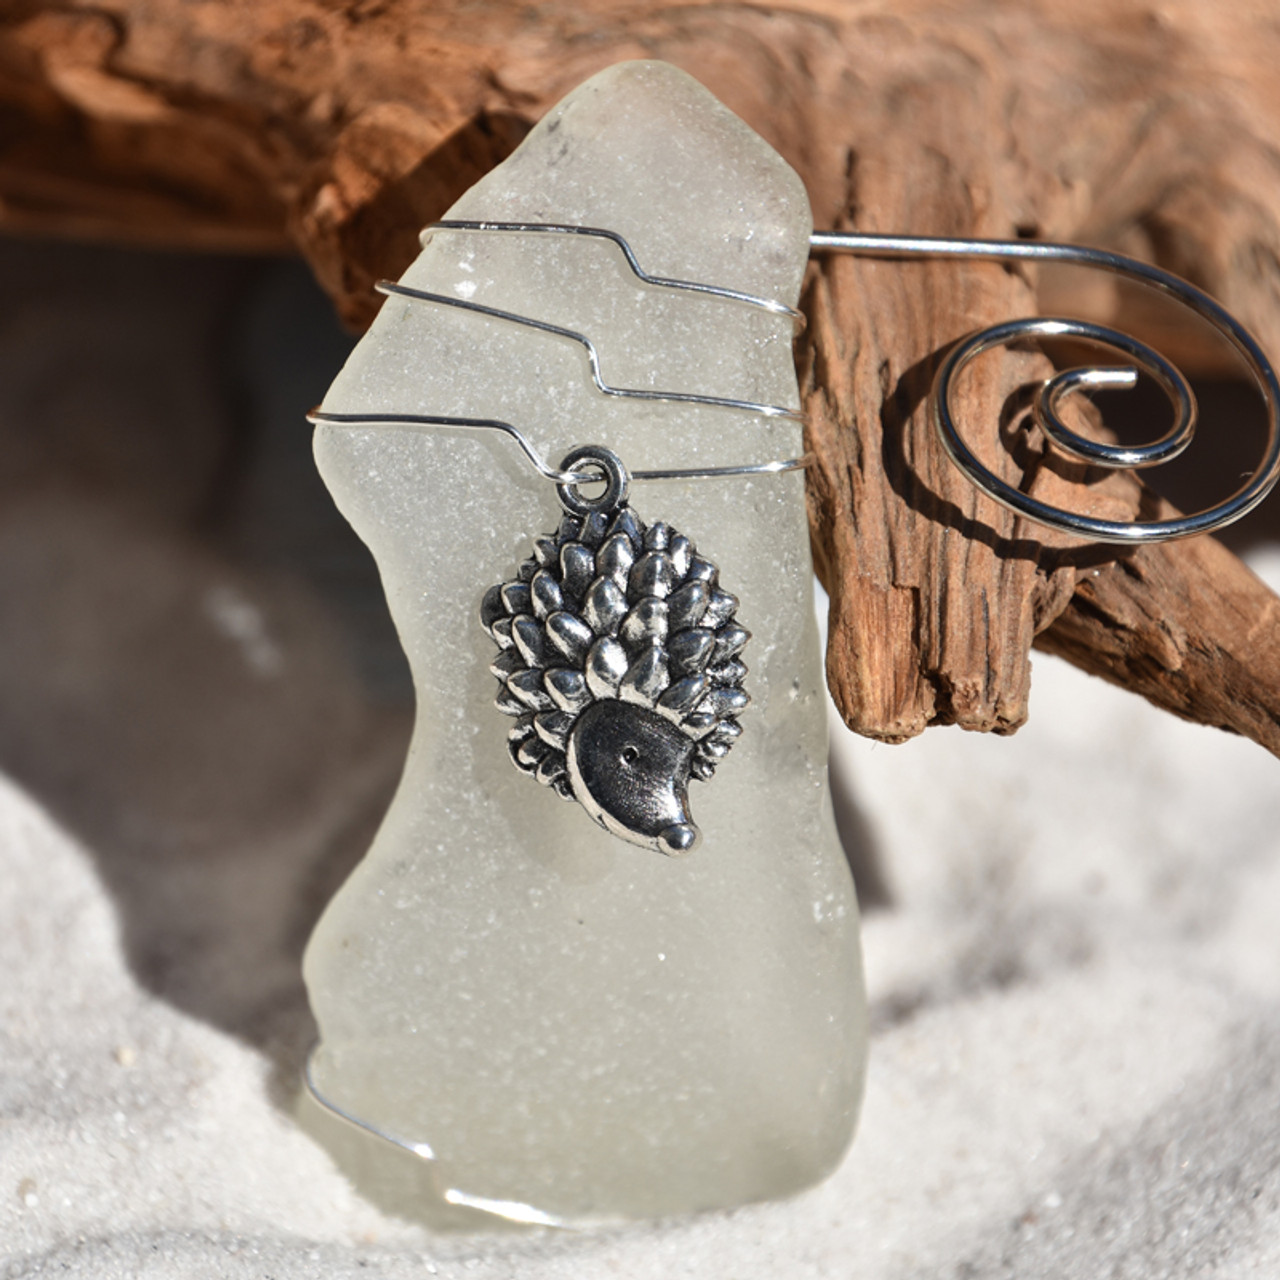 Hedgehog Charm on a Surf Tumbled Sea Glass Ornament - Choose Your Color Sea Glass Frosted, Green, and Brown - Made to Order